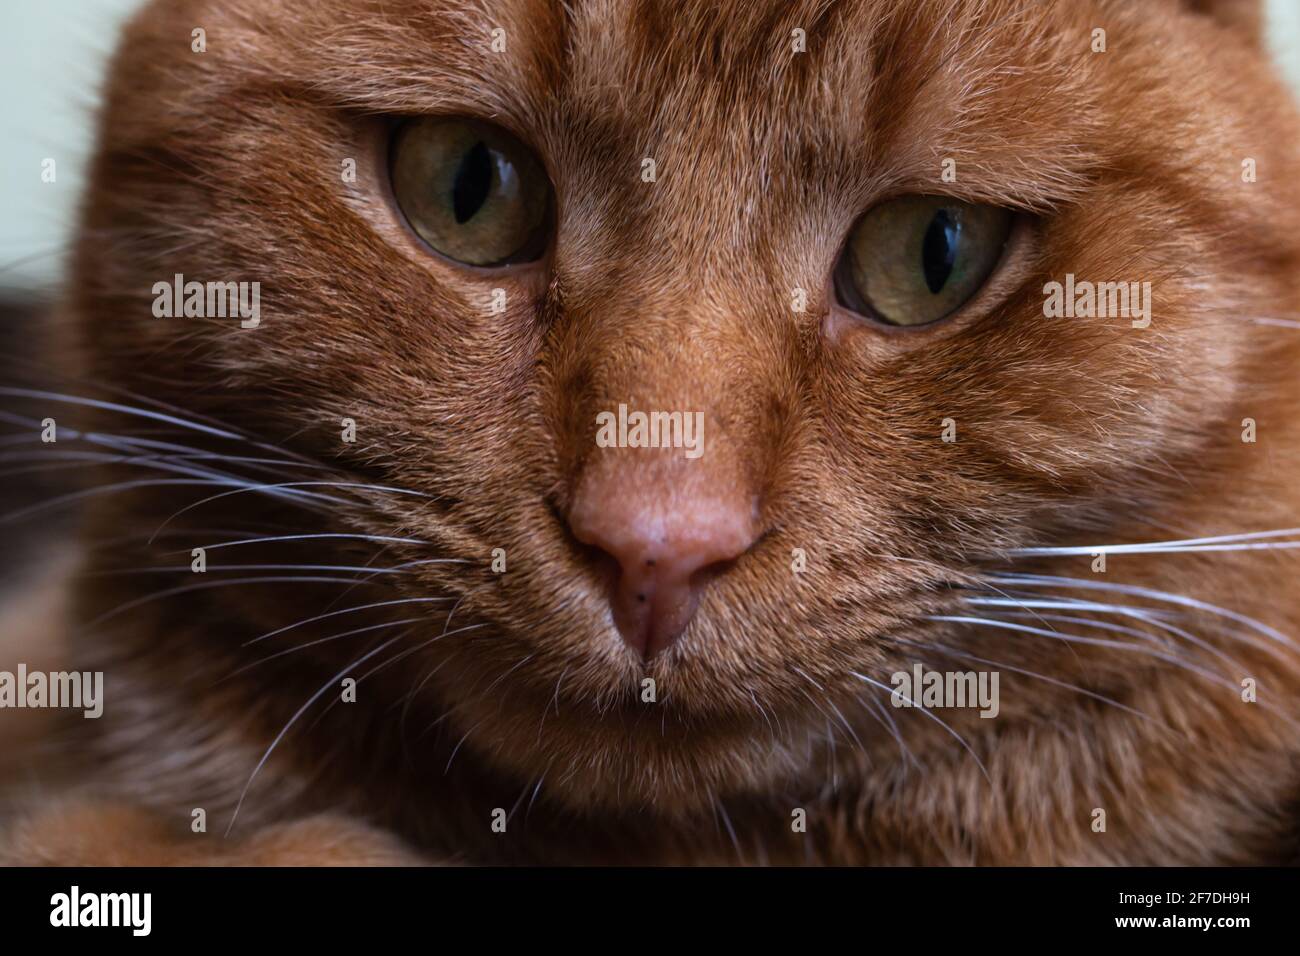 Closeup of an adorable domestic orange tabby cat, Toronto, Canada. Pink nose, green eyes, white whiskers, soft fur. Stock Photo